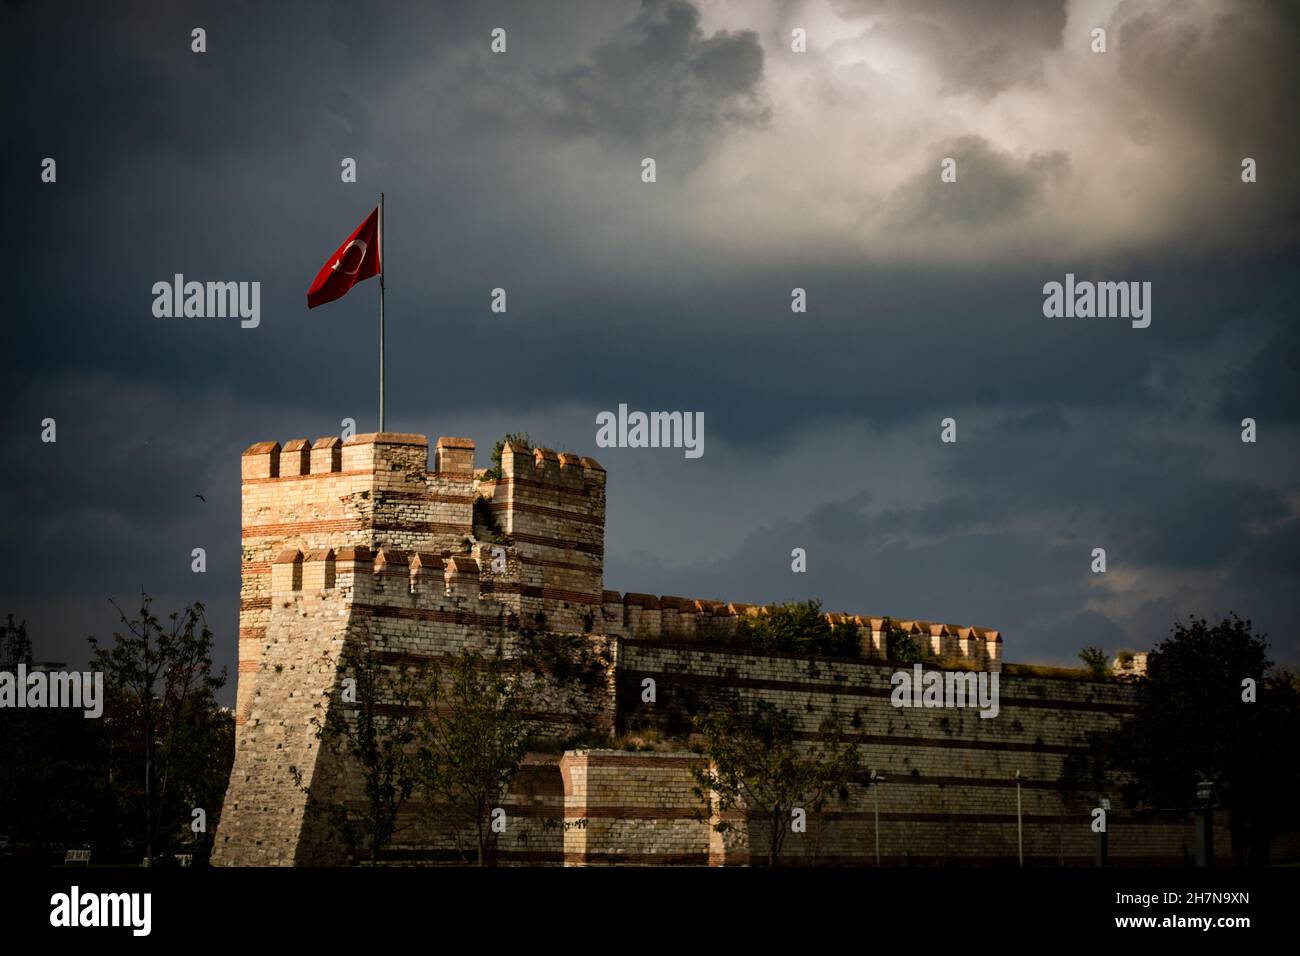 Turkish flag on fortress, turkish flag on top of the stone wall castle istanbul in night, medieval war history background concept Stock Photo